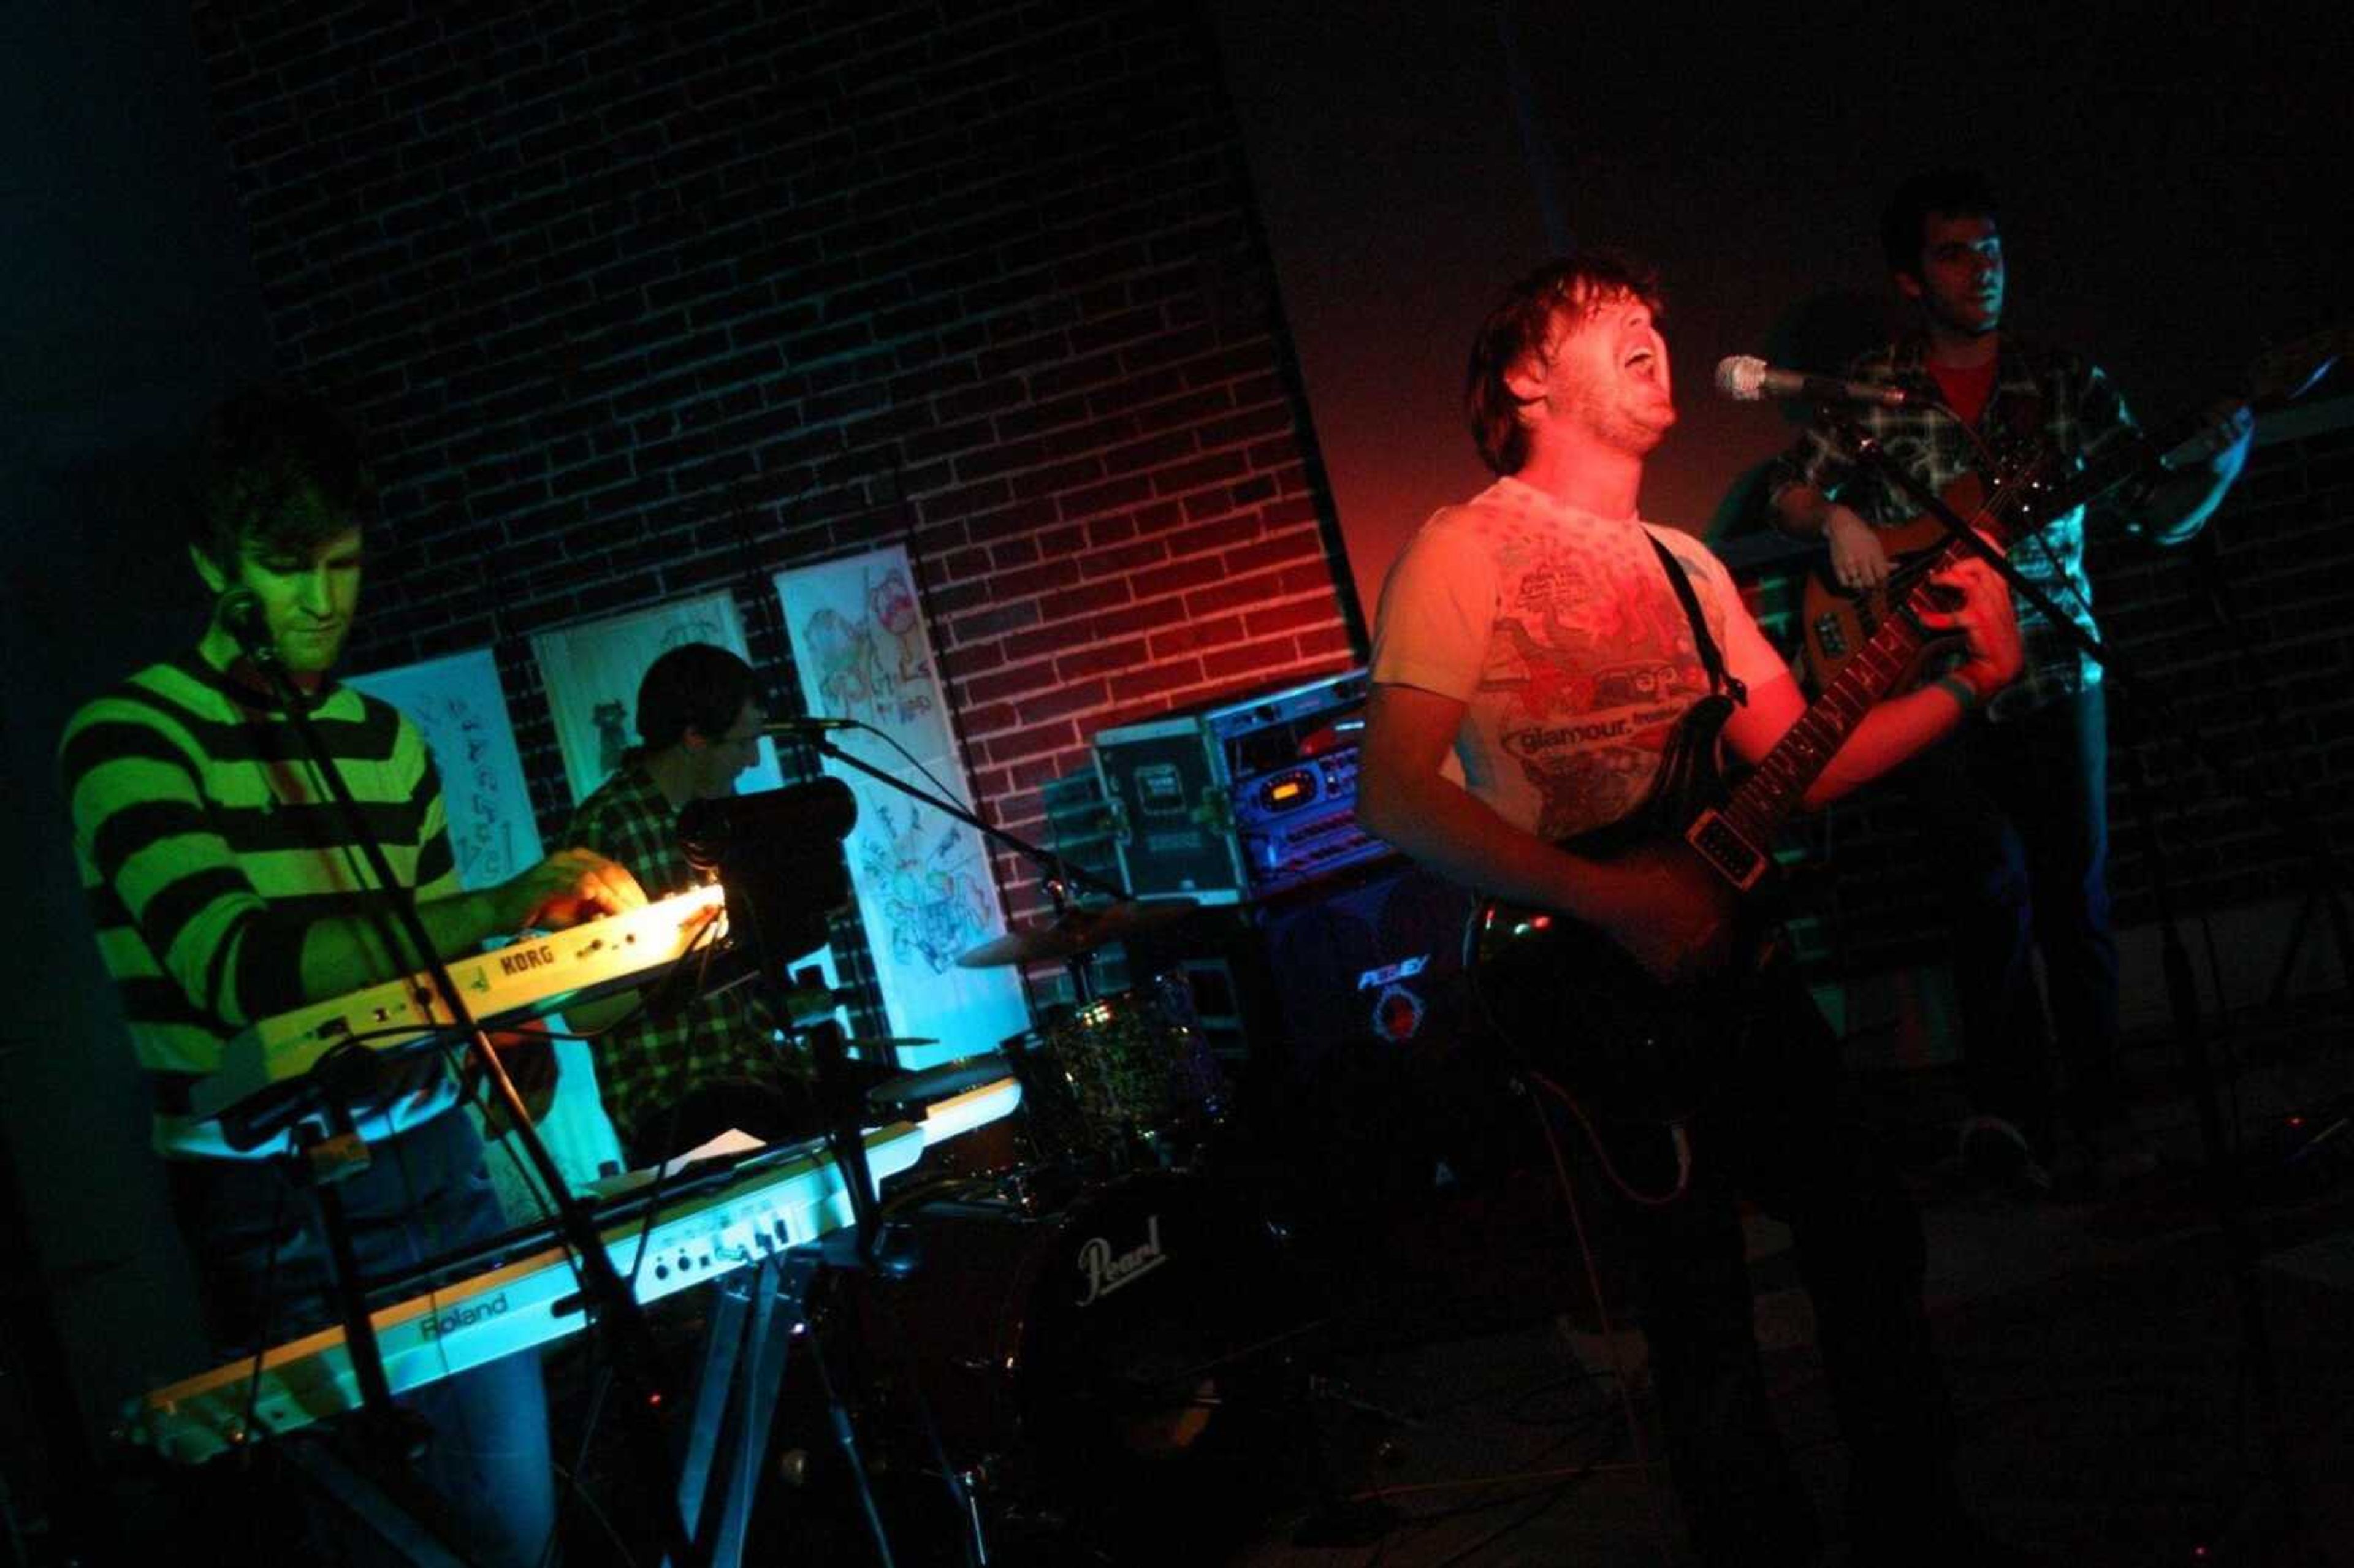 Local band composes songs around unusual subject matter